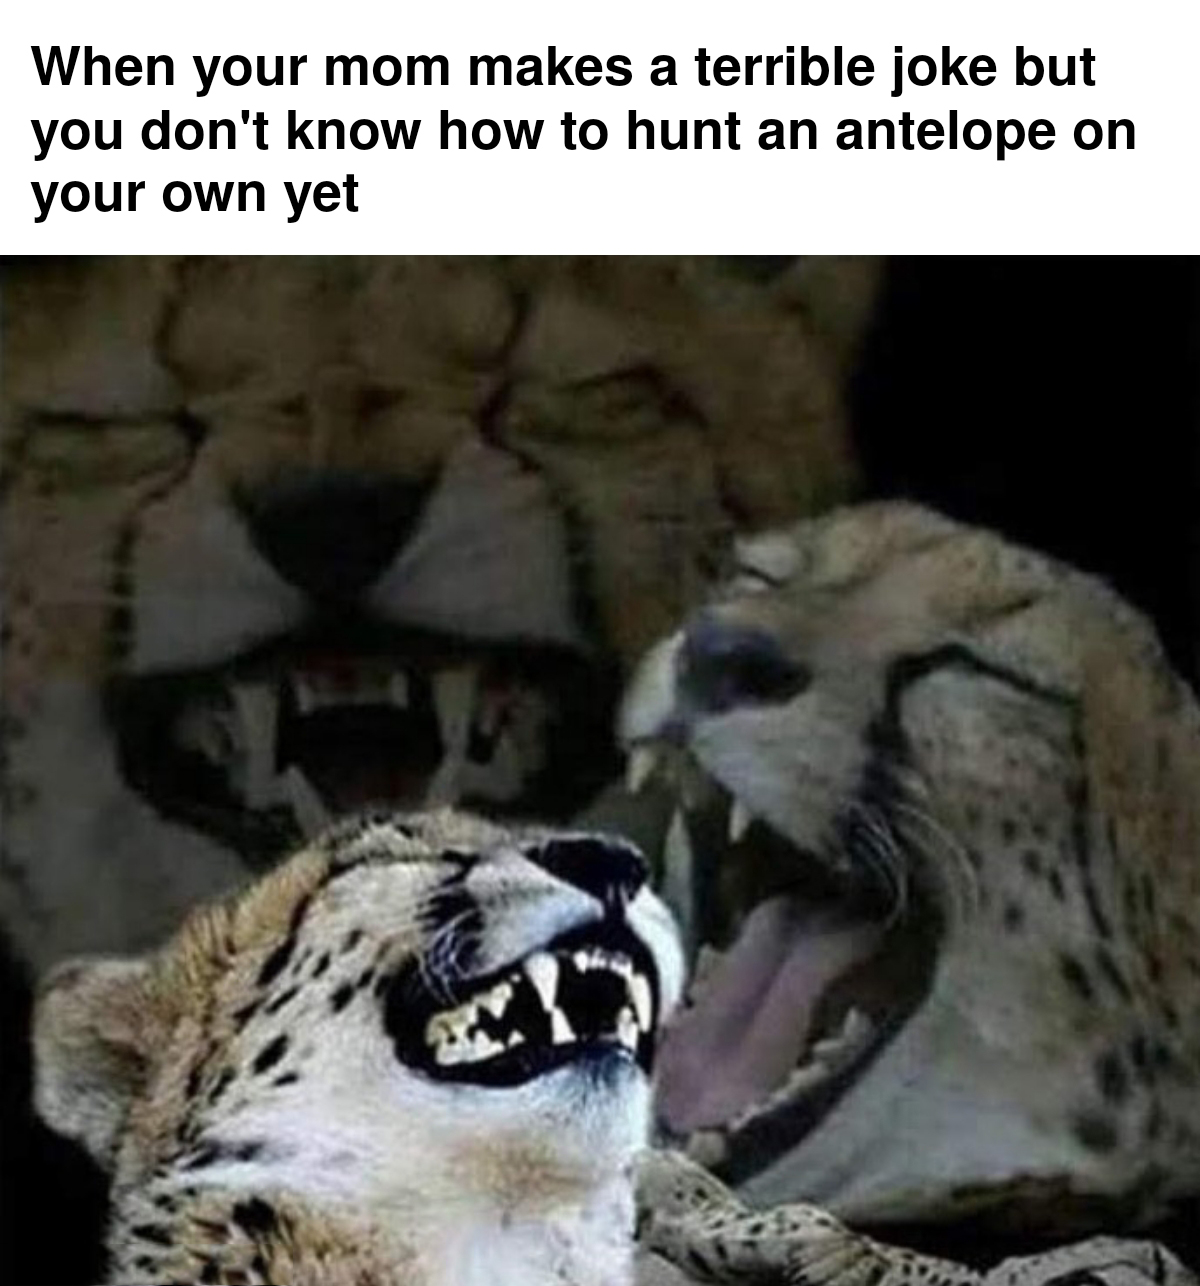 dank memes - laughing cheetah - When your mom makes a terrible joke but you don't know how to hunt an antelope on your own yet